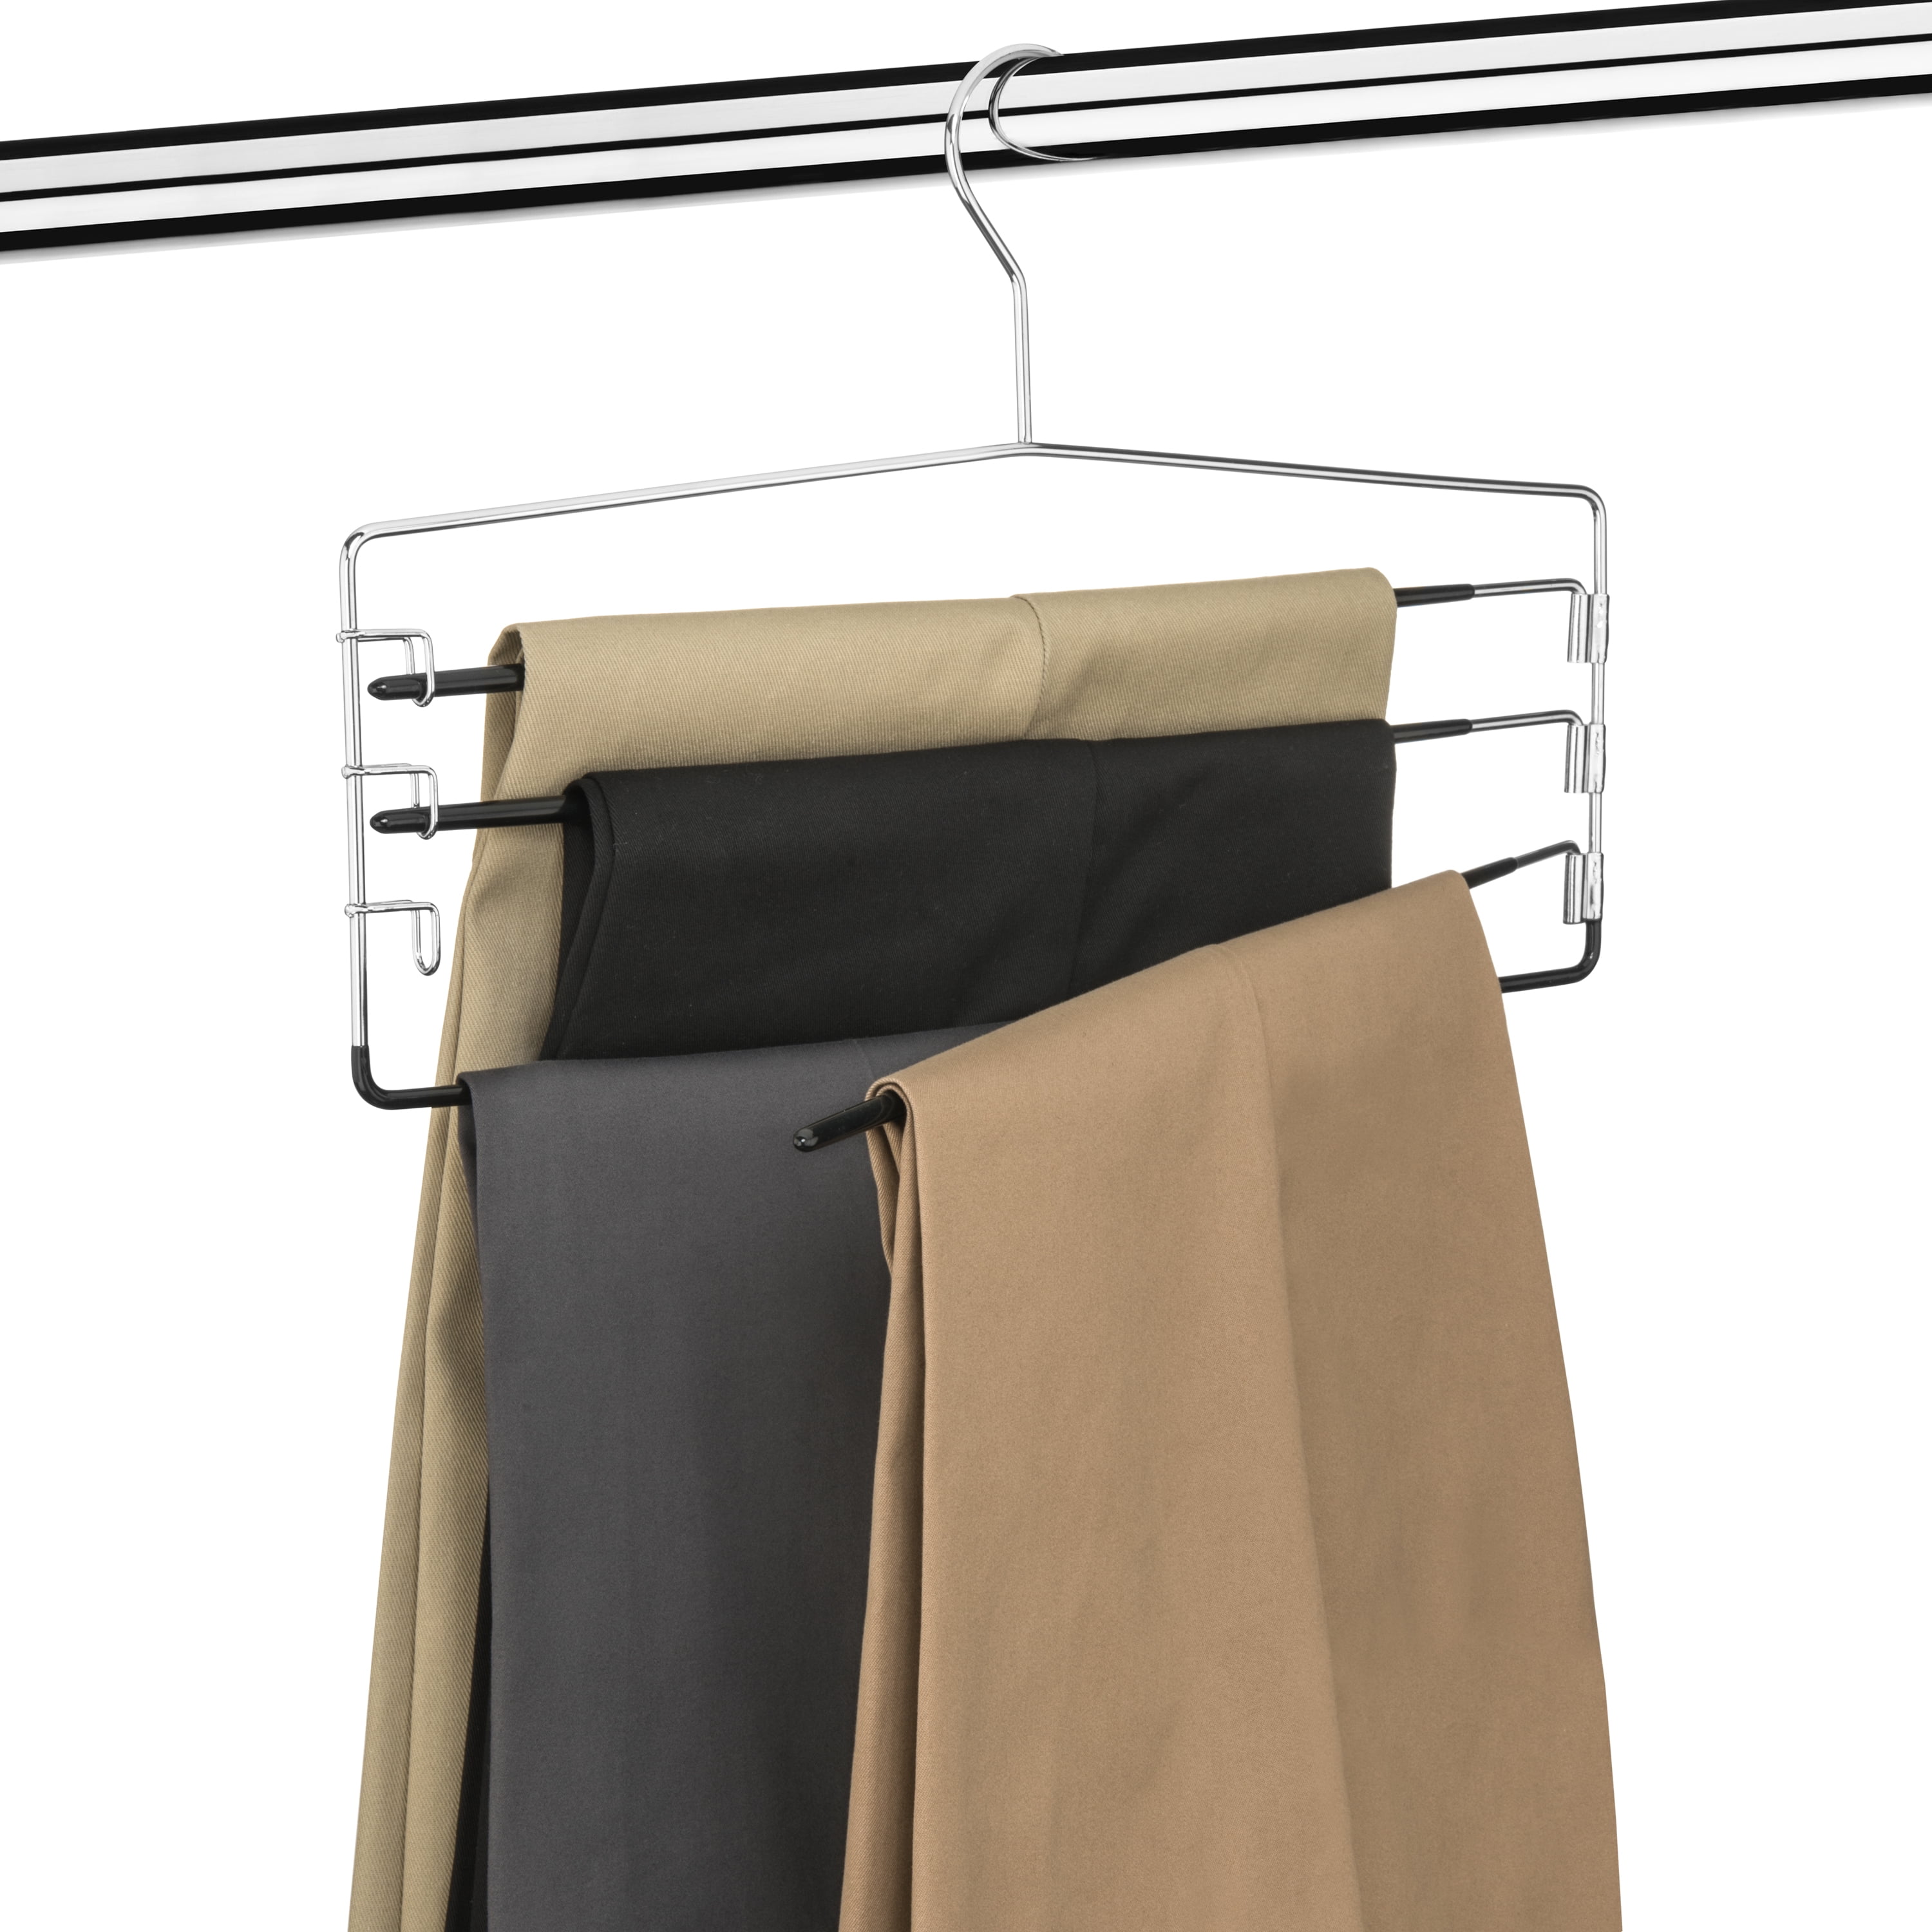 Hastings Home Metal Clothing Hanger (Black) - Set of 10, Space-Saving  Closet Organizer for Pants, Skirts, Shirts, Coats in the Hangers department  at